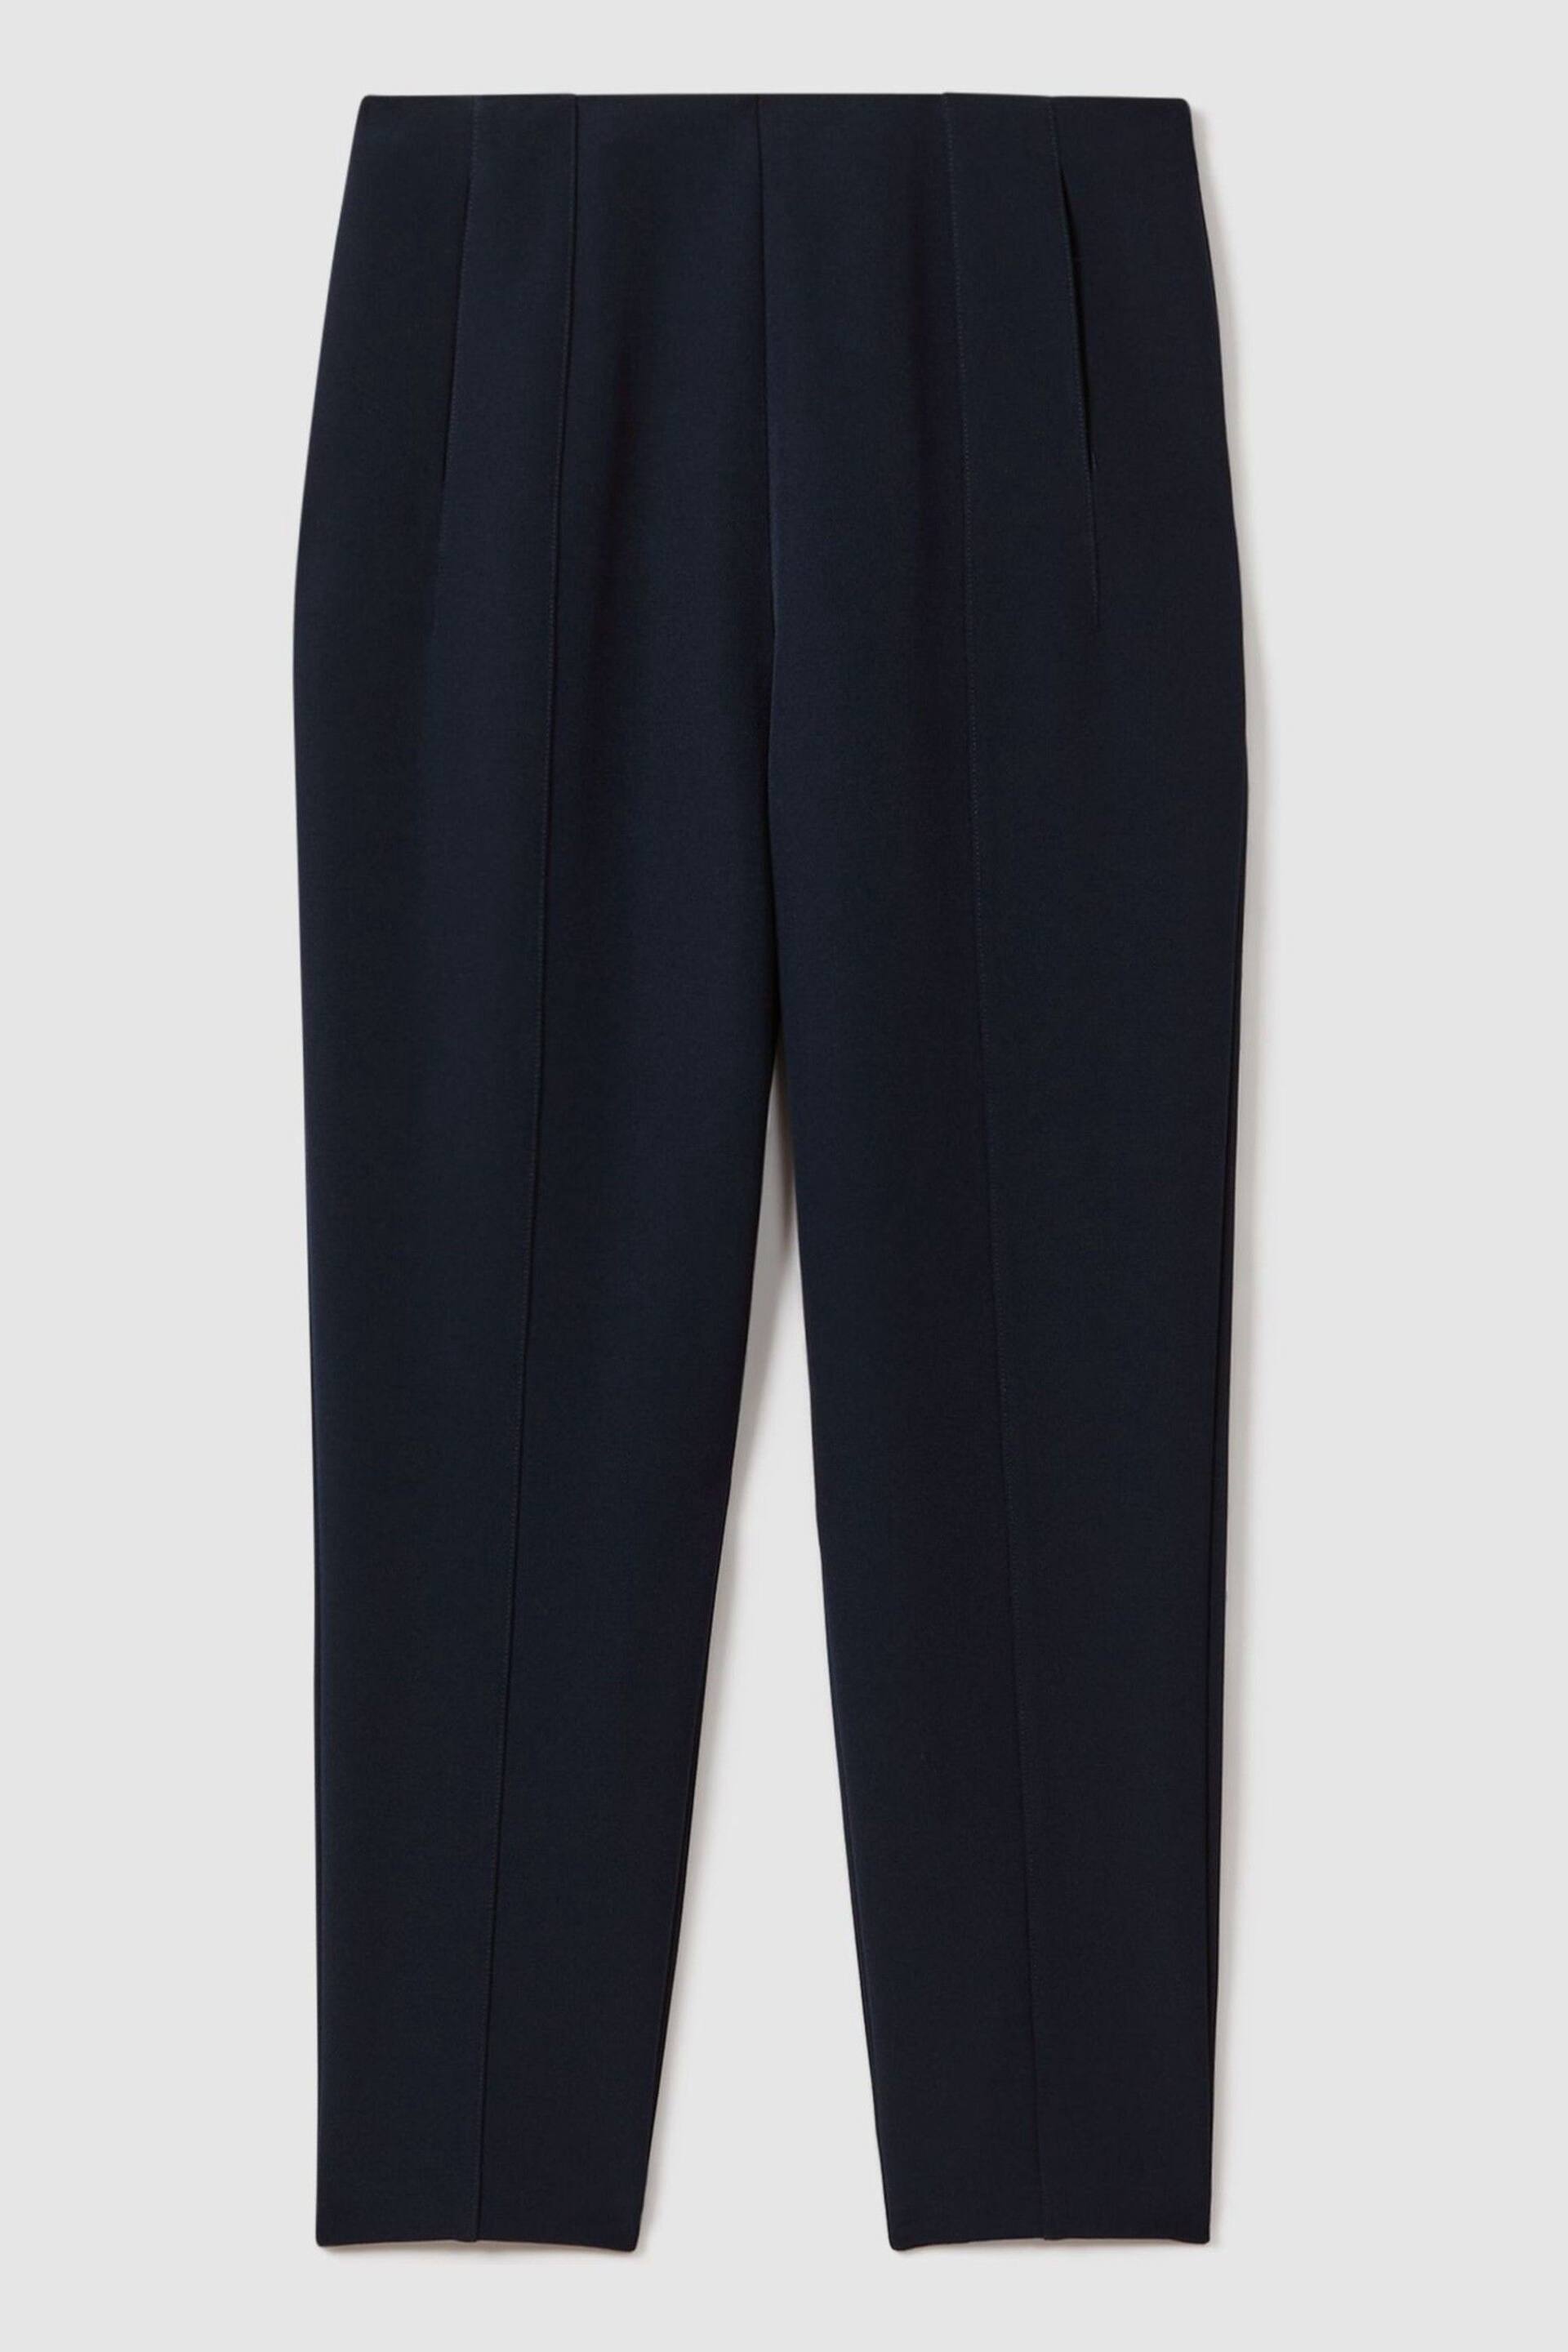 Florere Slim Fit Trousers - Image 2 of 6